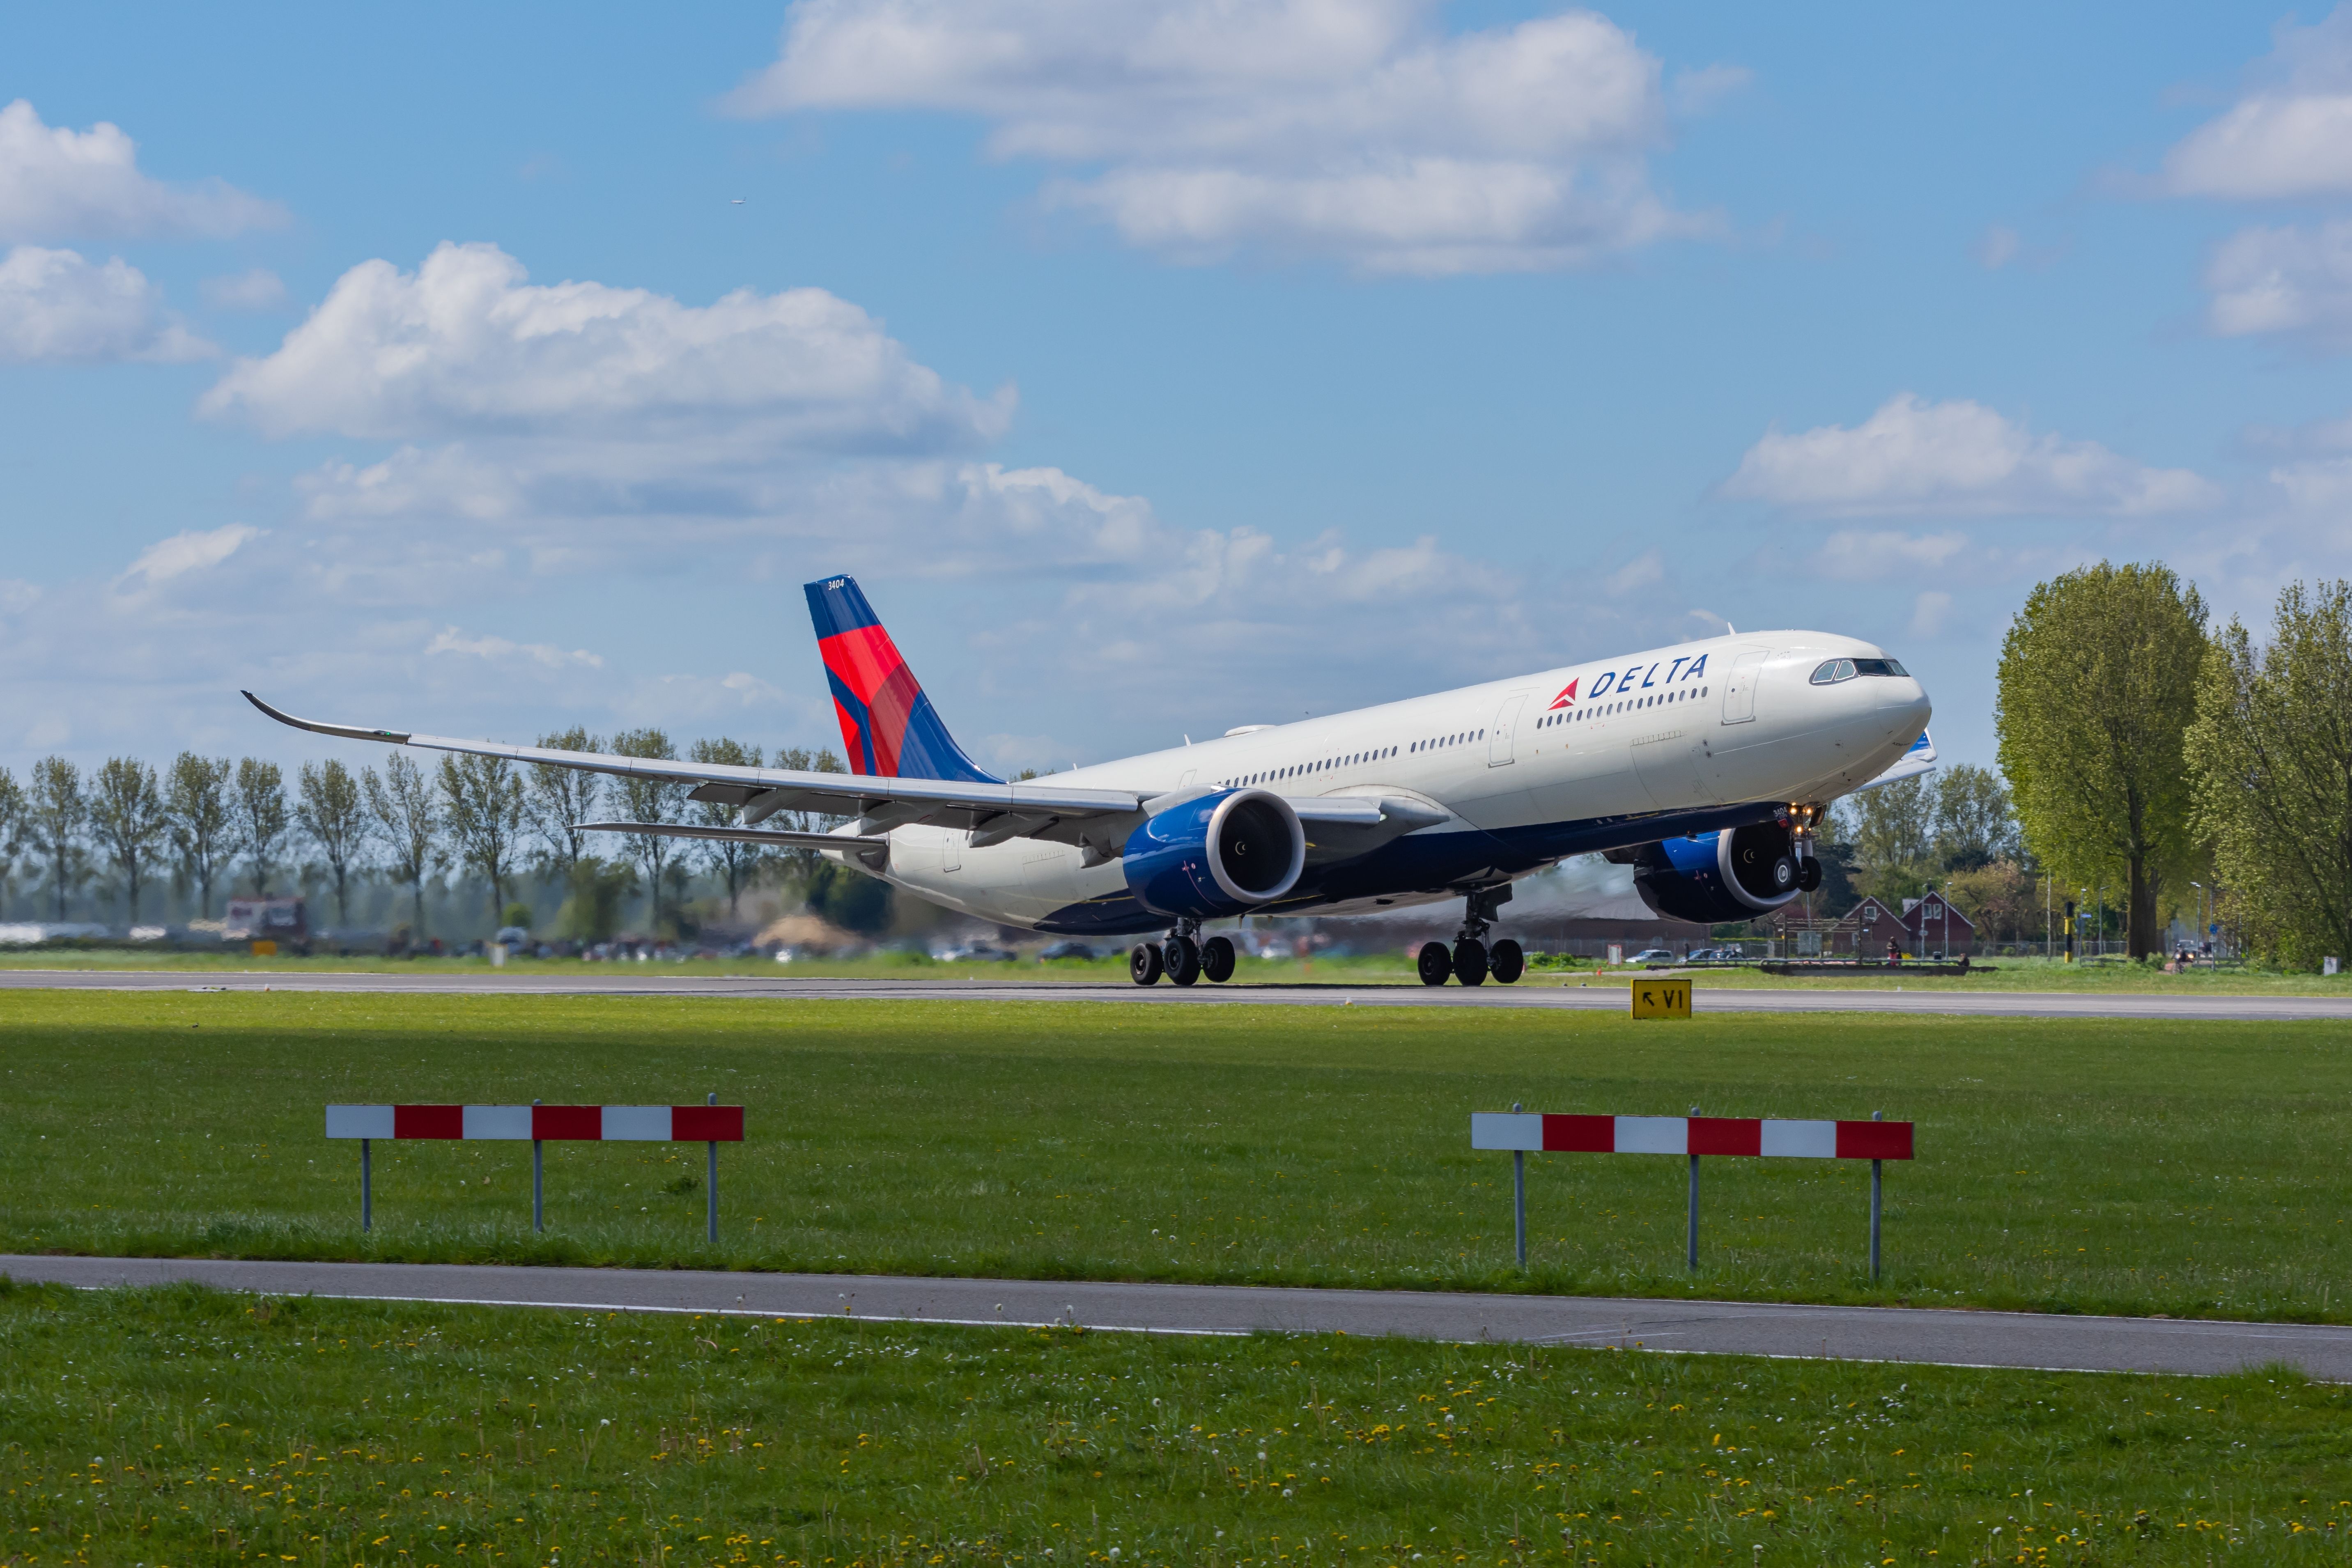 Delta Air Lines Airbus A330-900neo taking off from Amsterdam.